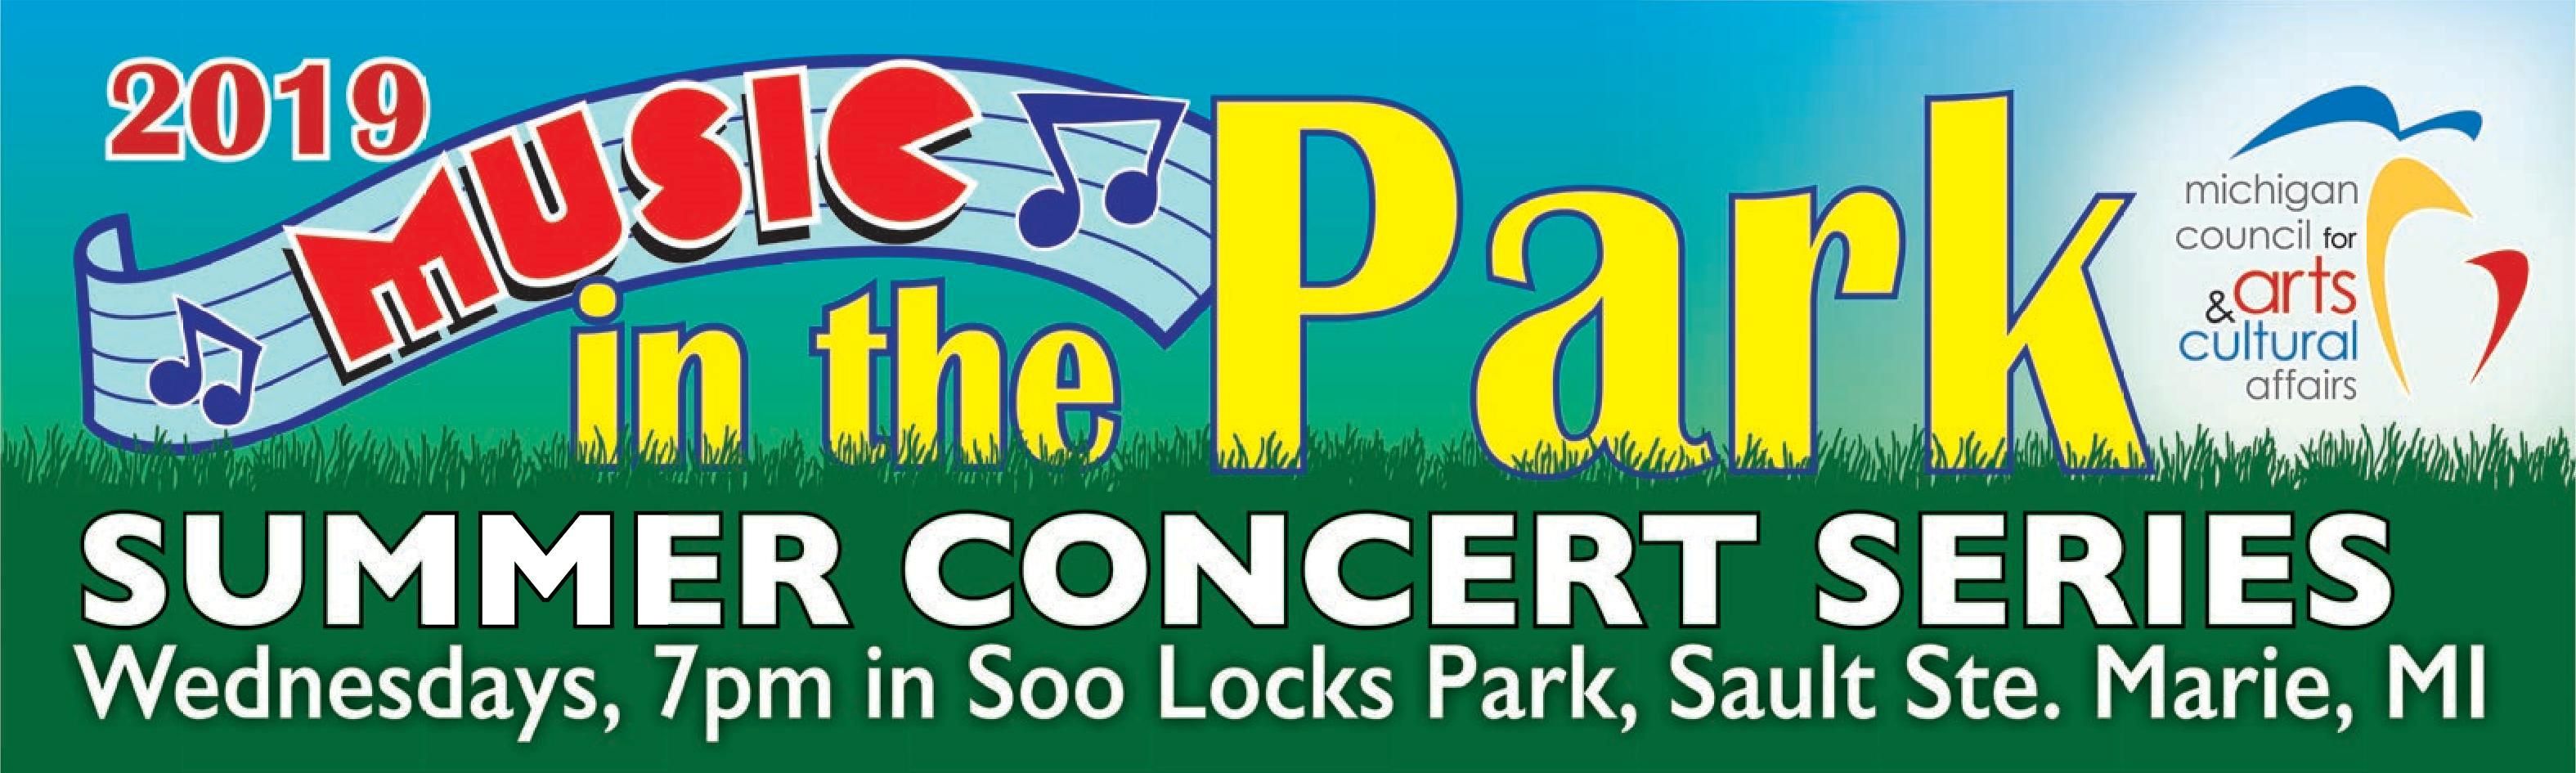 Music in the Park Downtown Sault Ste. Marie, Michigan!